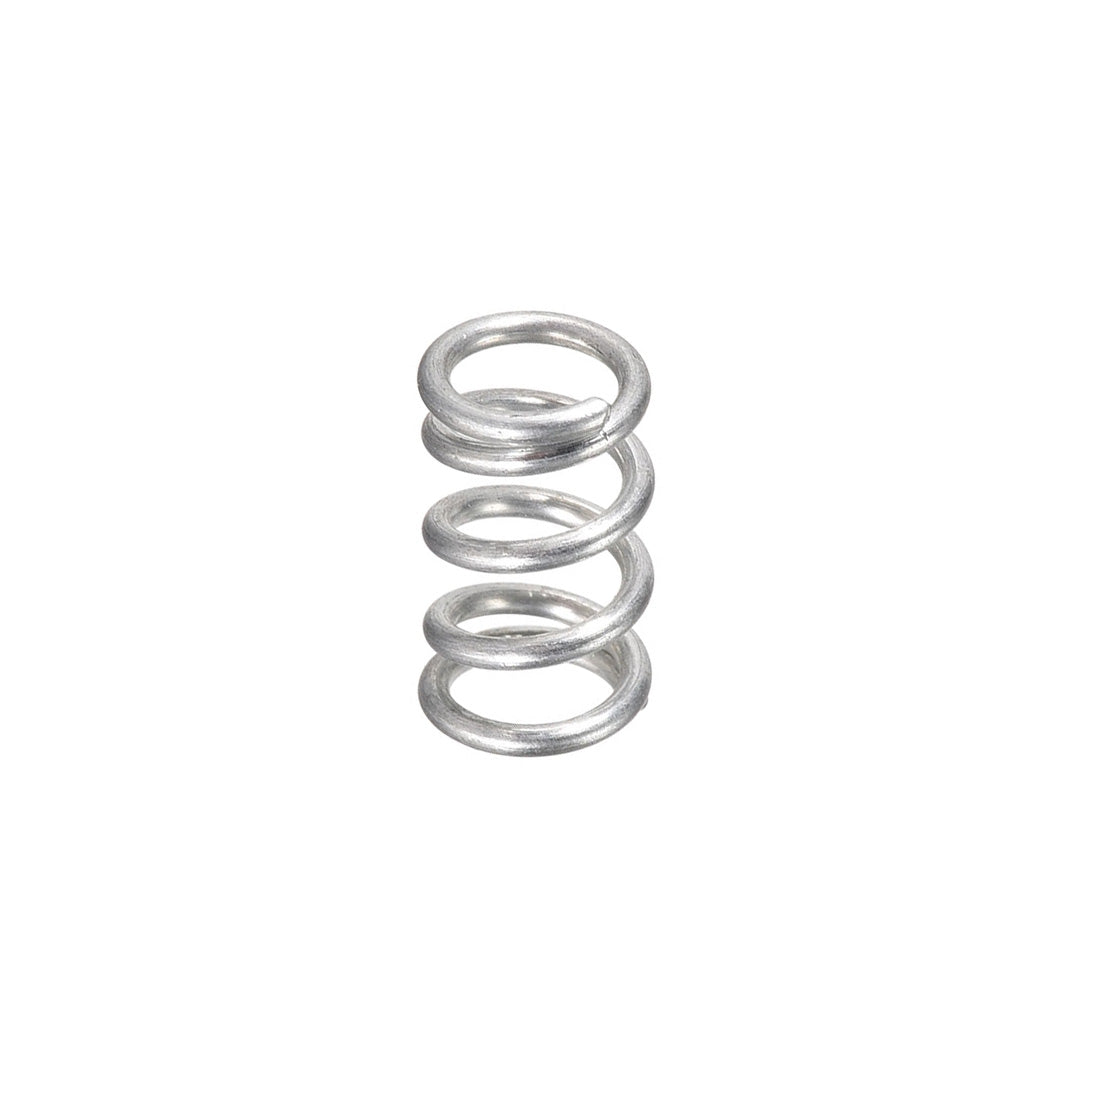 uxcell Uxcell Heated Bed Springs for 3D Printer Extruder Compression Spring, 7 x 12mm 20pcs